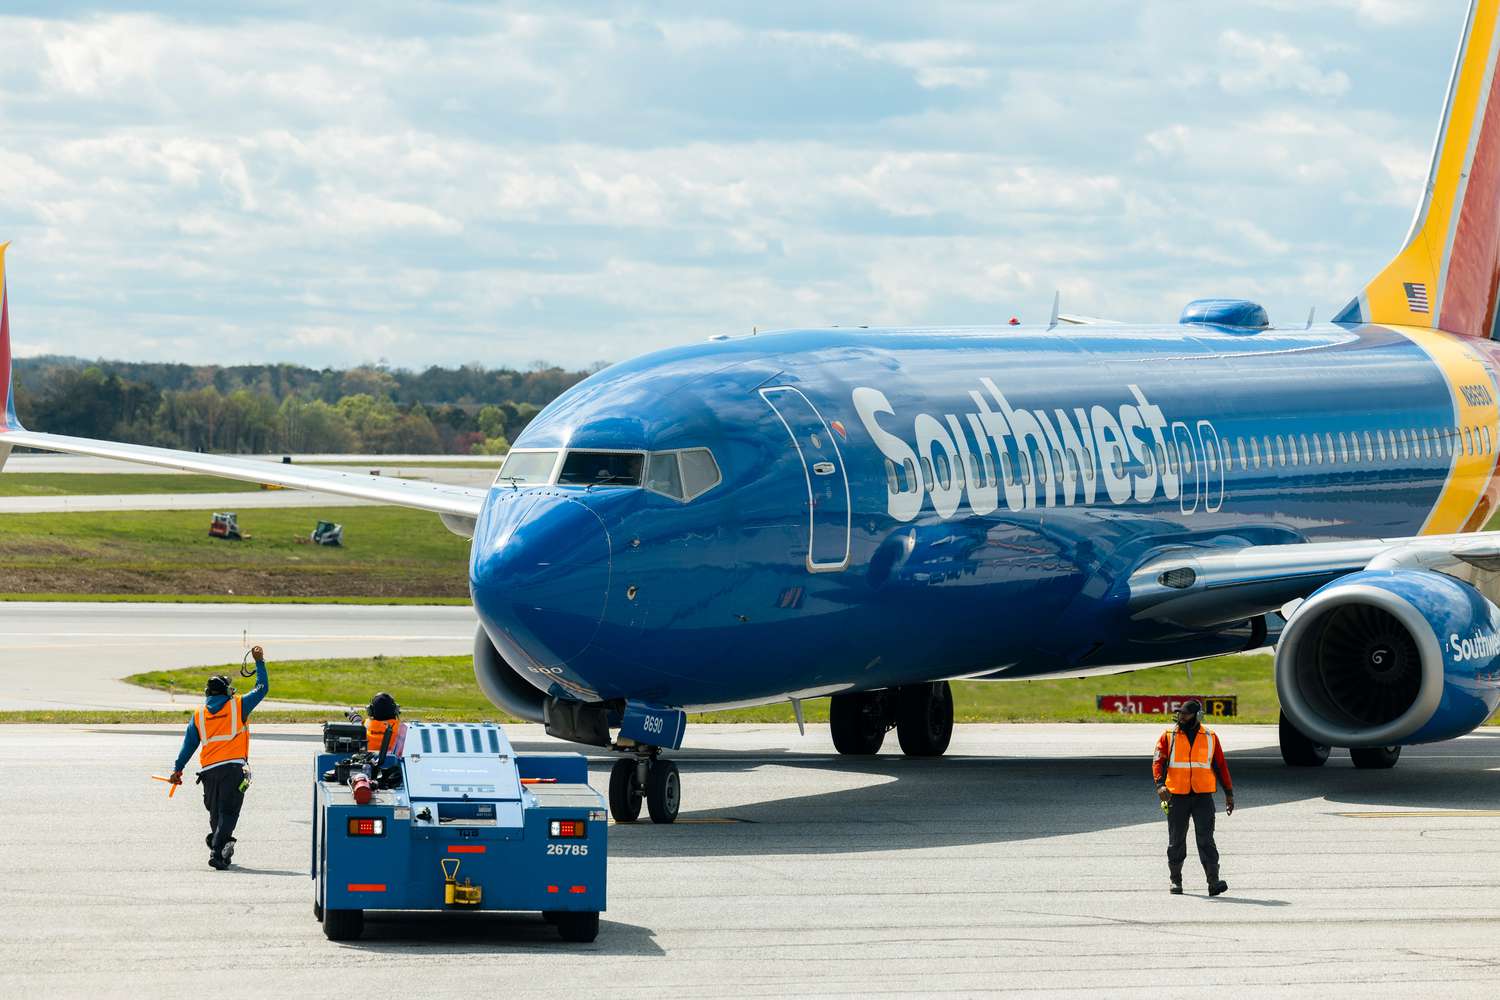 Southwest Airlines Stock Sinks After Q1 Results Miss, Guidance Cut [Video]